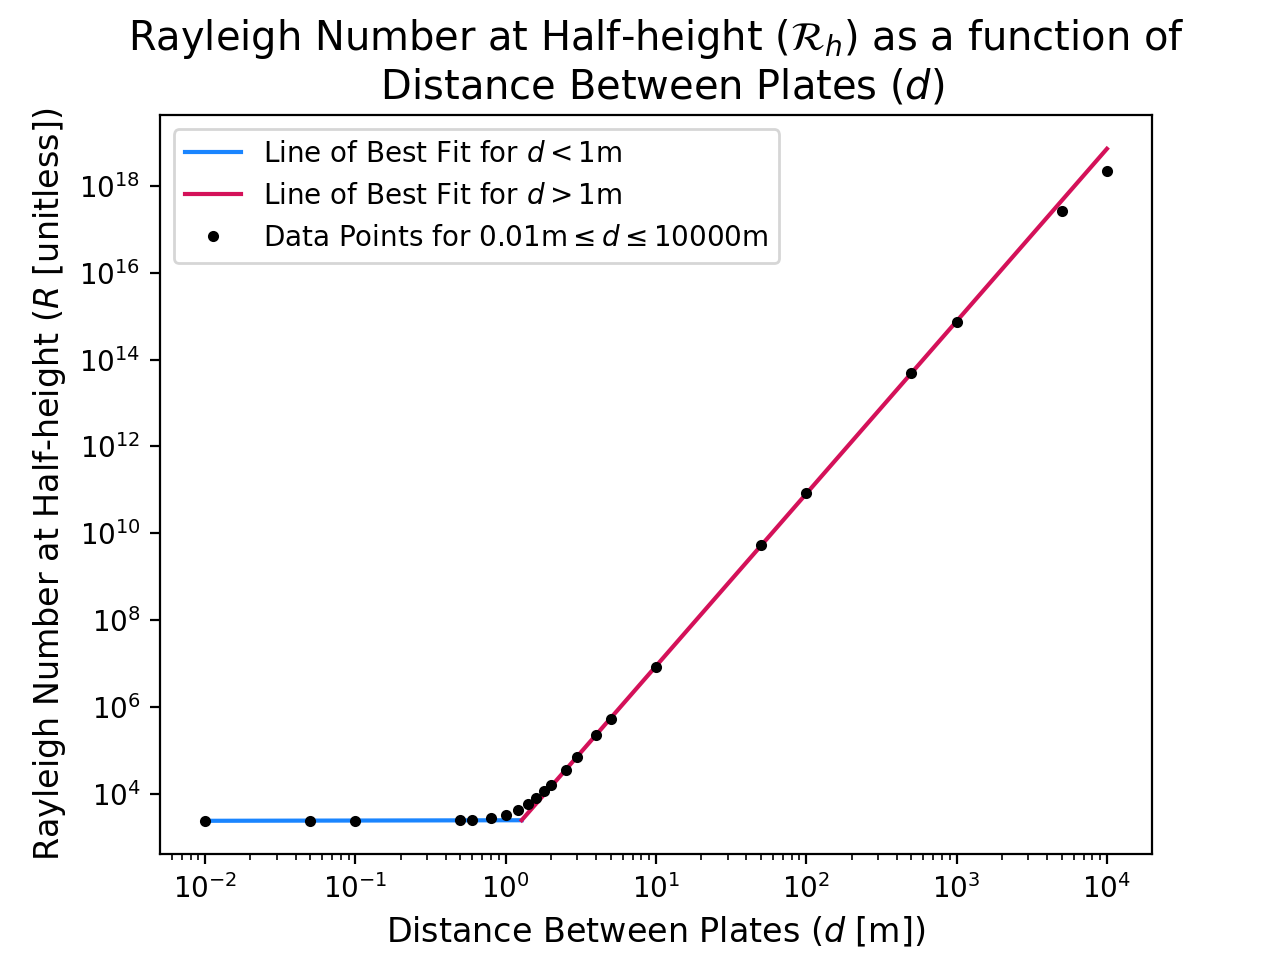 Figure 3a. The two lines of best fit intersect at the point where d = 1.28 m and R_h = 2446.27. Their slopes are 0.006 for d < 1.28 m and 3.97 for d > 1.28 m.